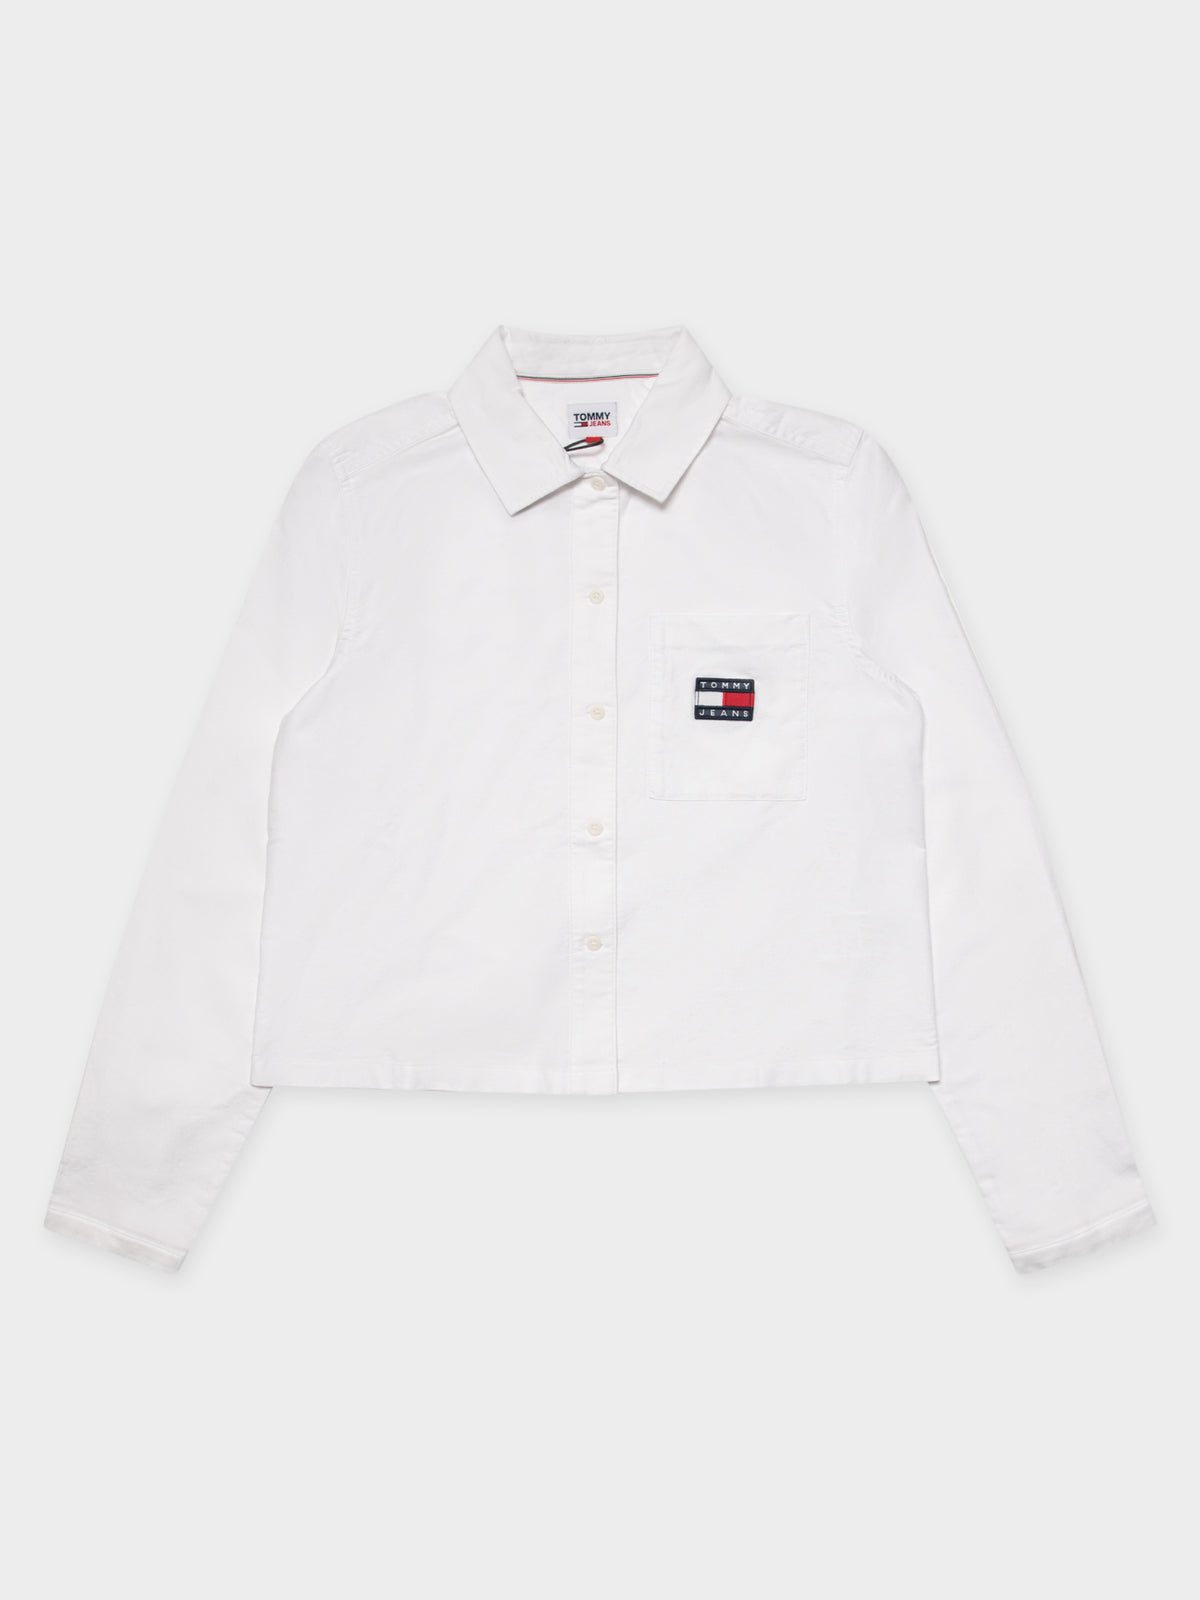 Tommy Badge Organic Shirt in White